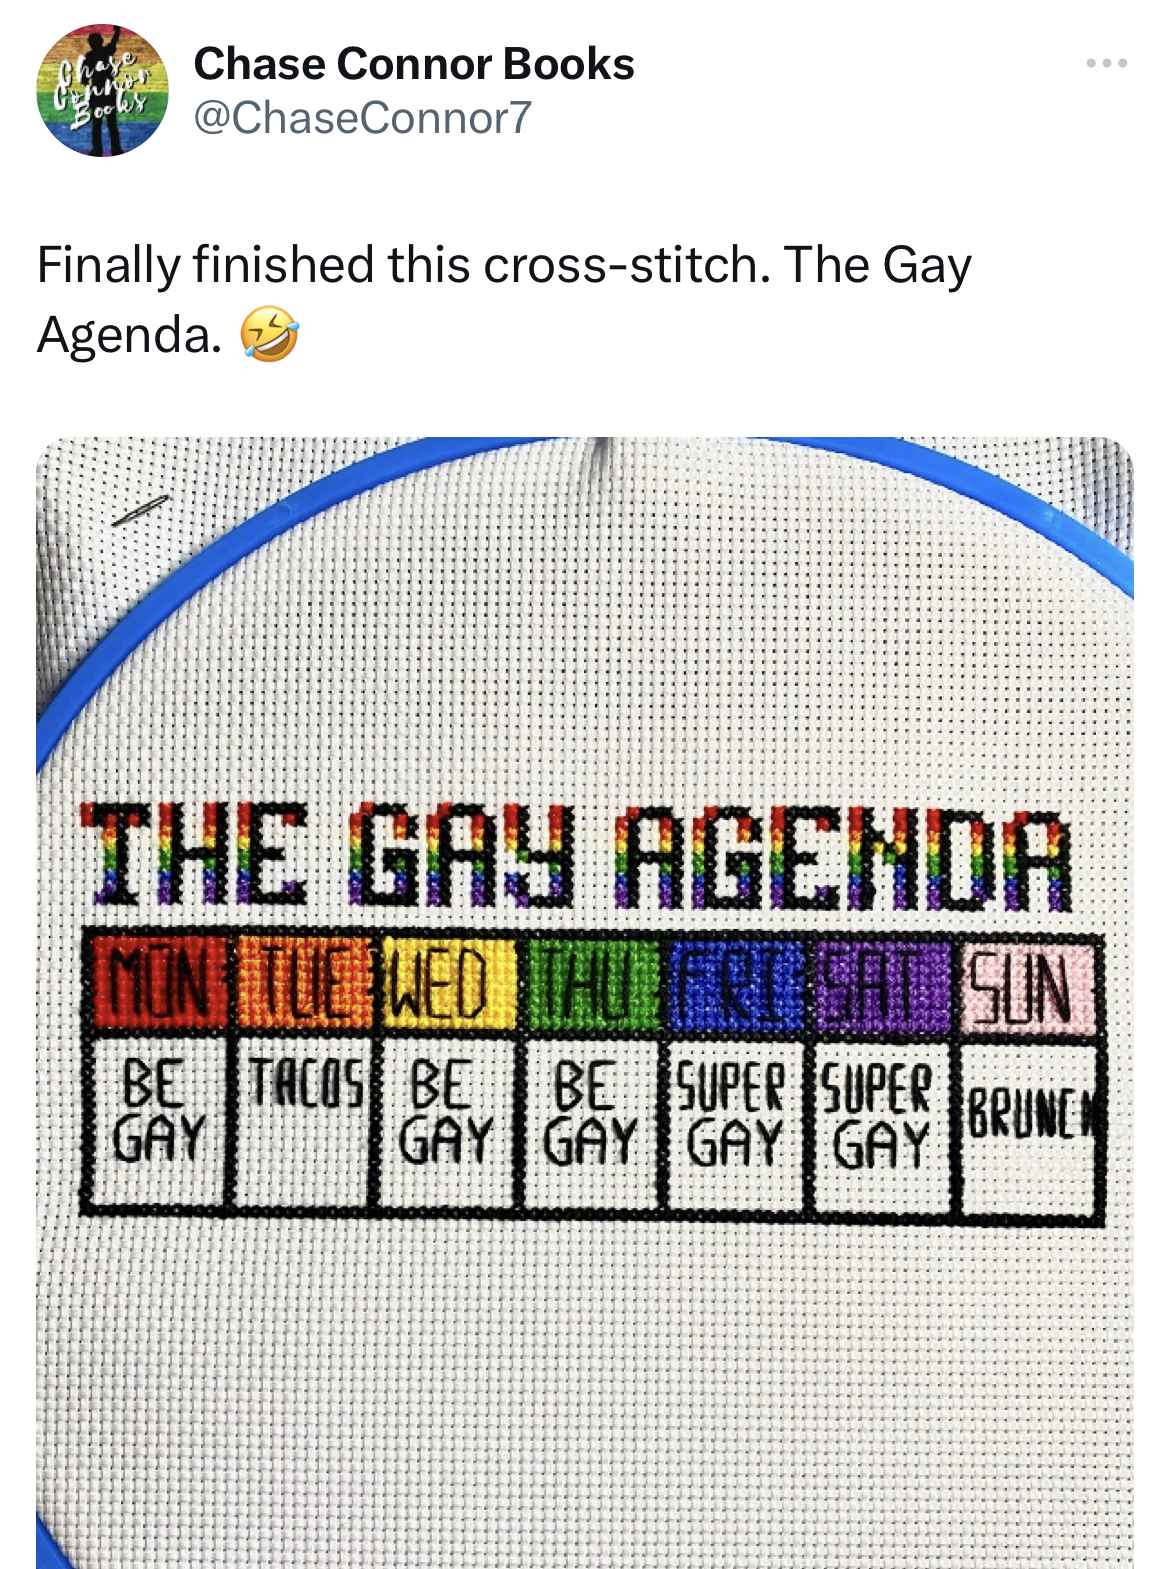 savage tweets - material - Chase Connor Books Finally finished this crossstitch. The Gay Agenda. The Gay Agenda Mon Tue Wed Thu Fri Sat Sun Be Tacos Be Be Super Super Brunen Gay Gay Gay Gay Gay